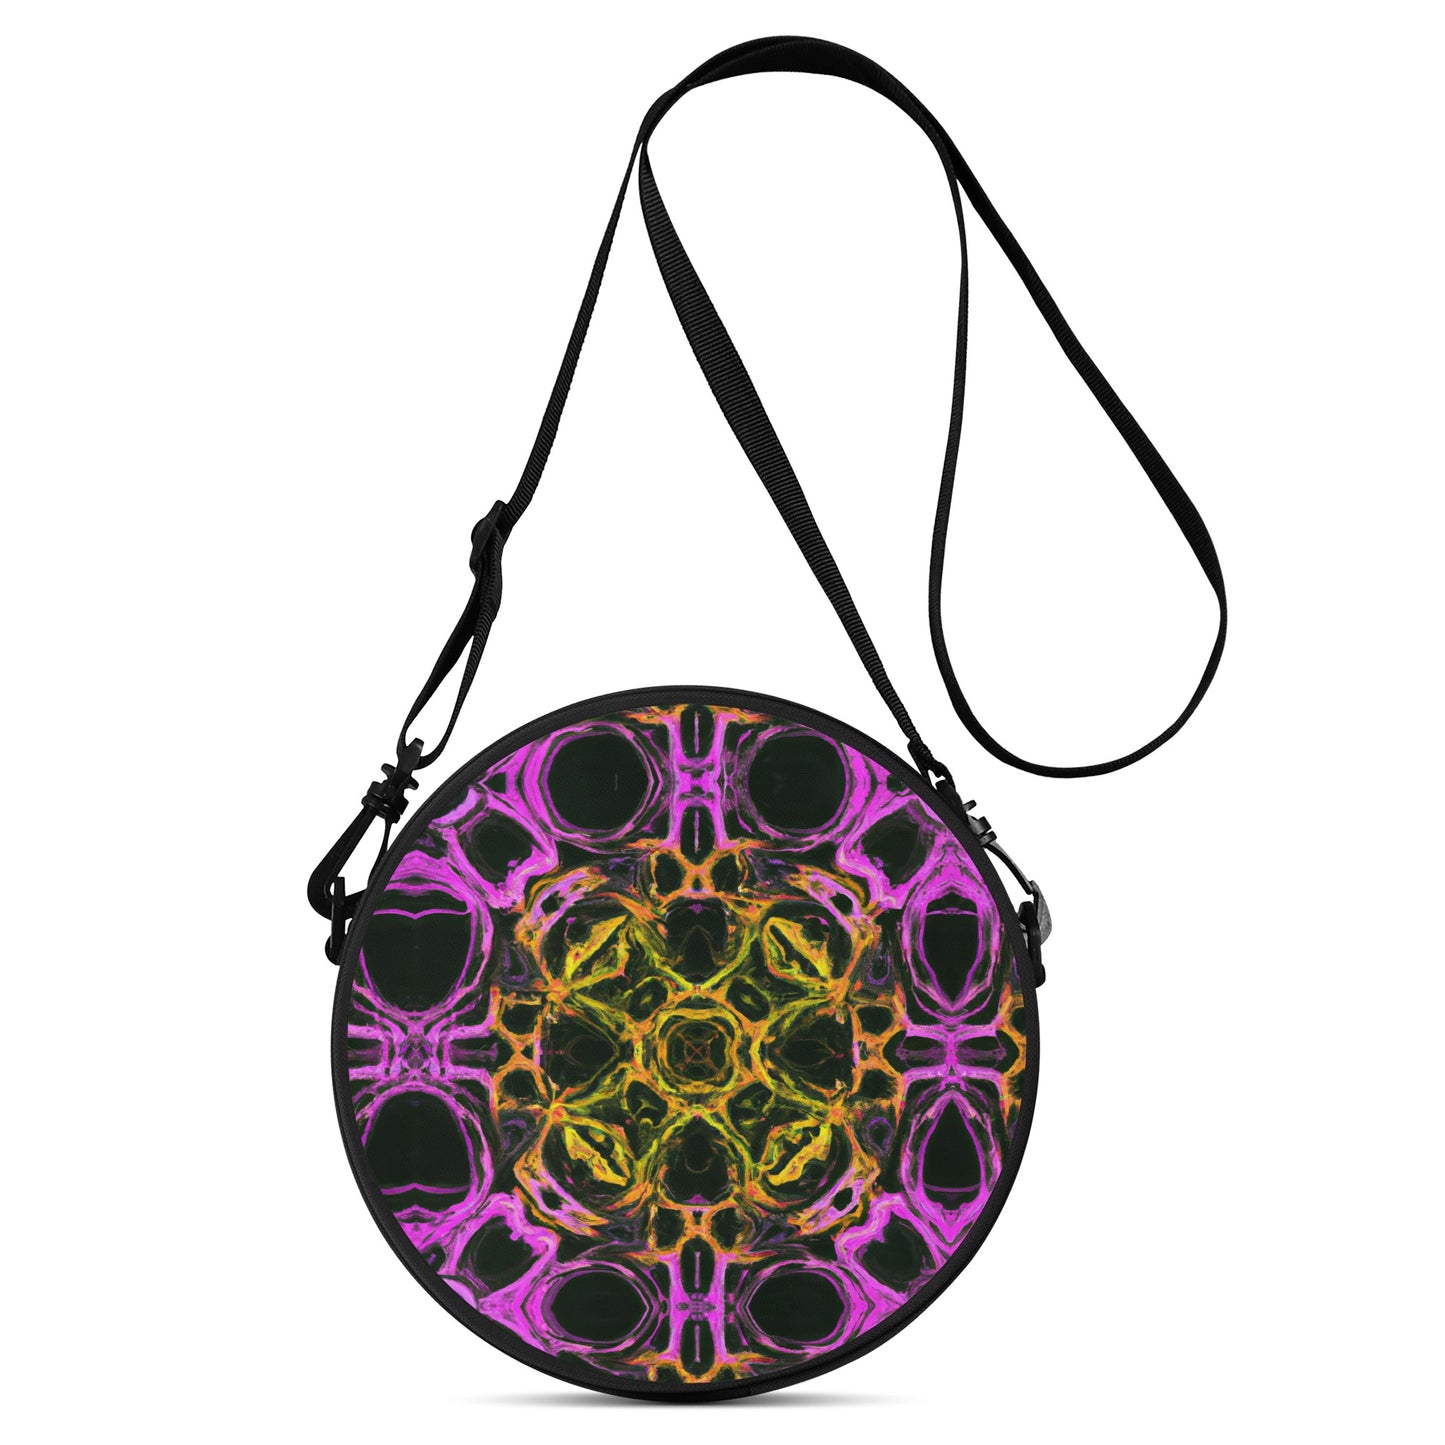 This Round Satchel Bag is a stylish accessory with a cool design that is digitally printed on the front.  Featuring a unique and multi coloured vibrant design of a psychedelia styled purple and yellow honeycomb pattern.  Unleash your creative side and make a statement with this bag!